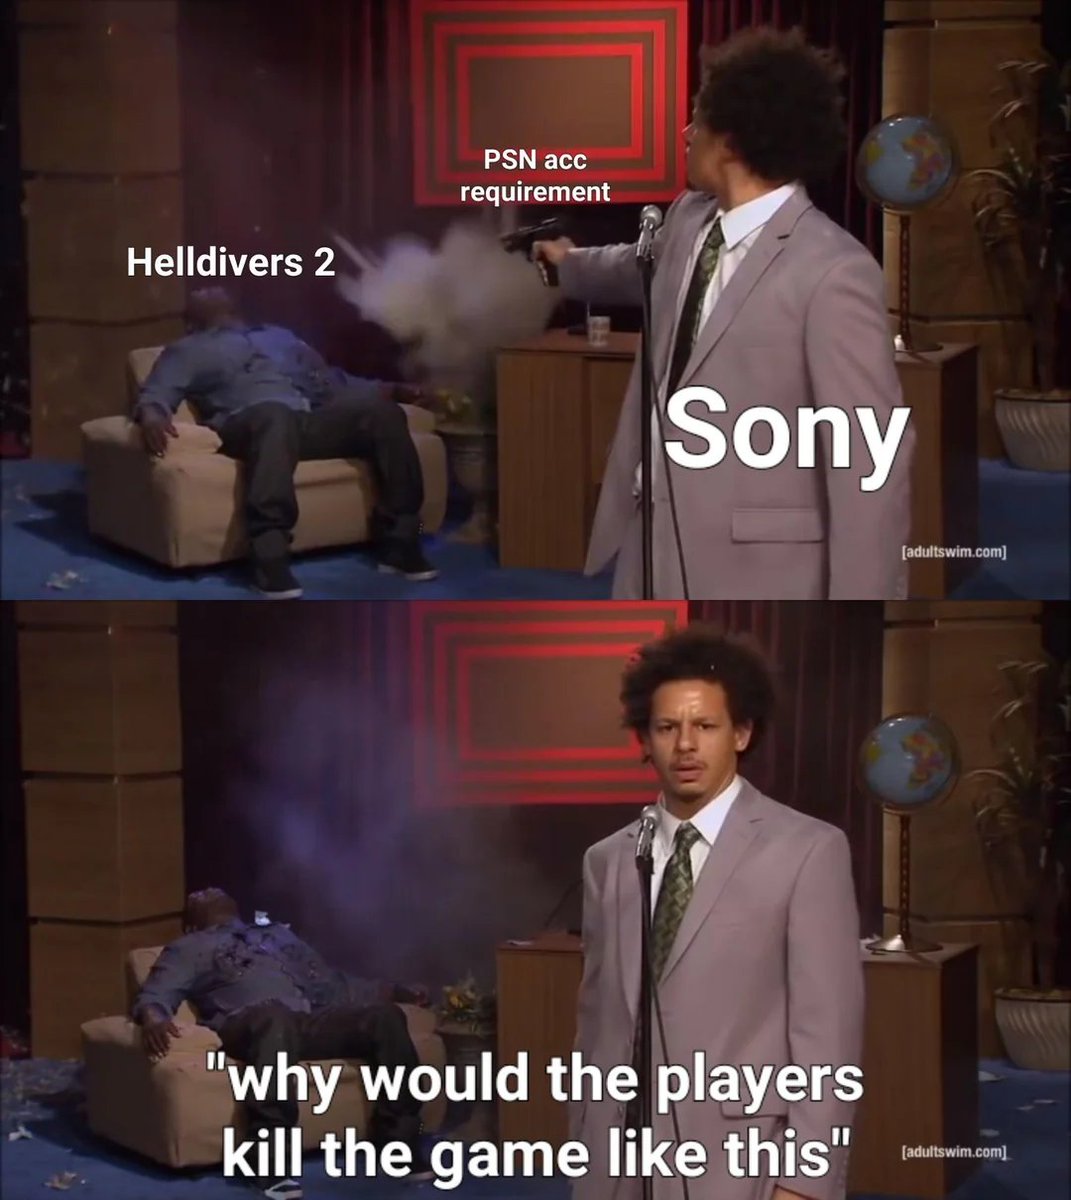 Fuck around and find out

SONY made a mistake fucking with probably one of the most unified fanbases I've ever seen, so of course they're going to stage a walk out and nuke the game reviews, force refunds and make a statement out of the corporations -- have they played the game?